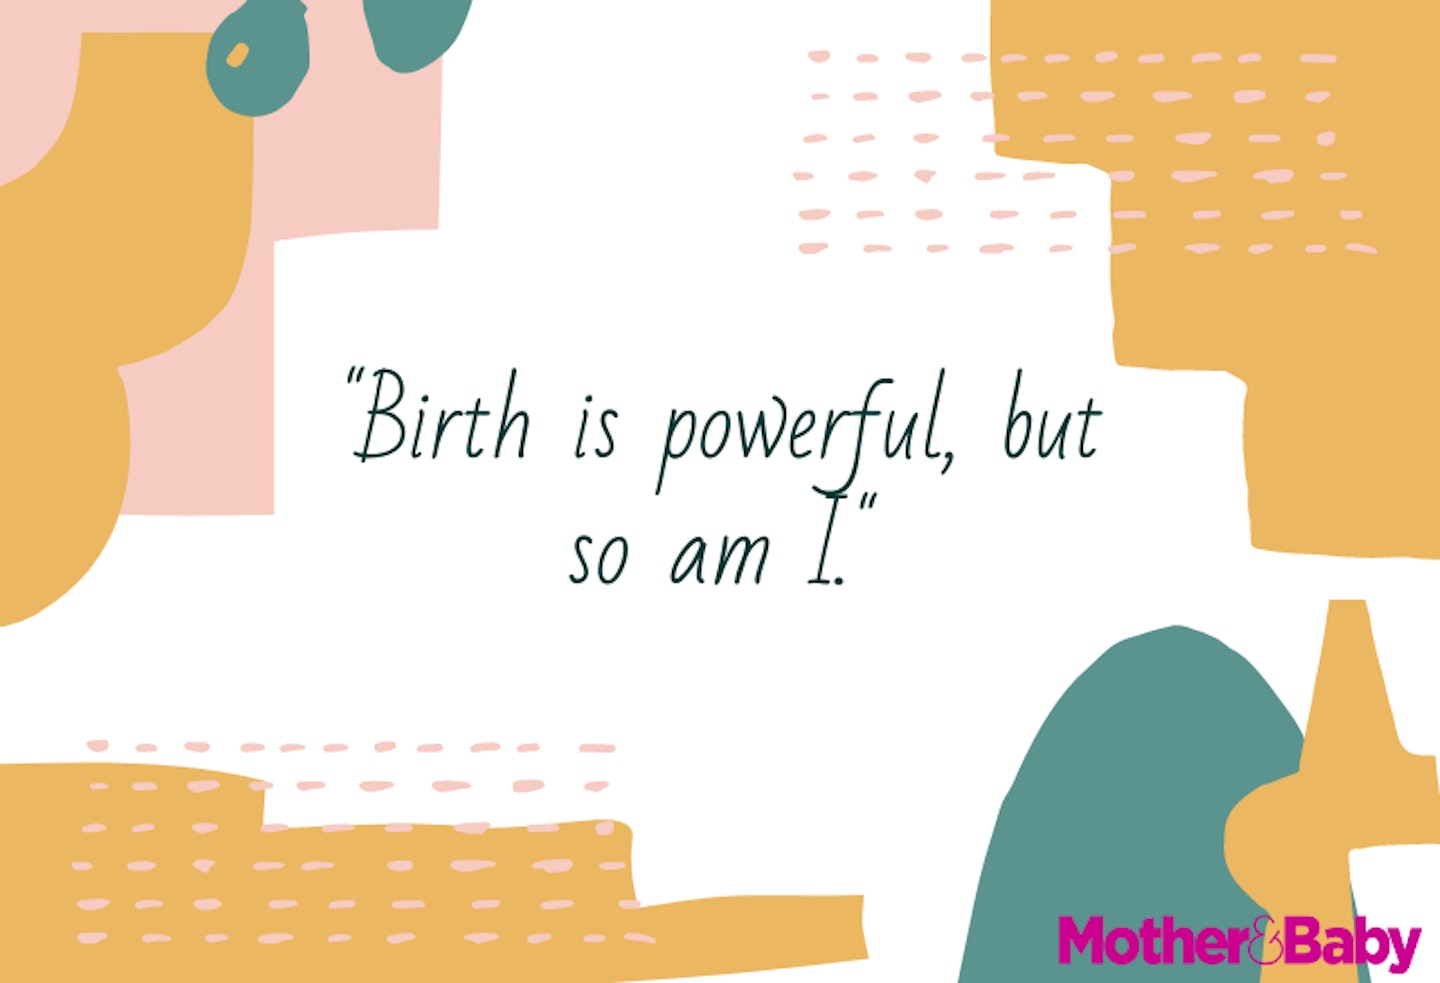 Birth is powerful but so am I